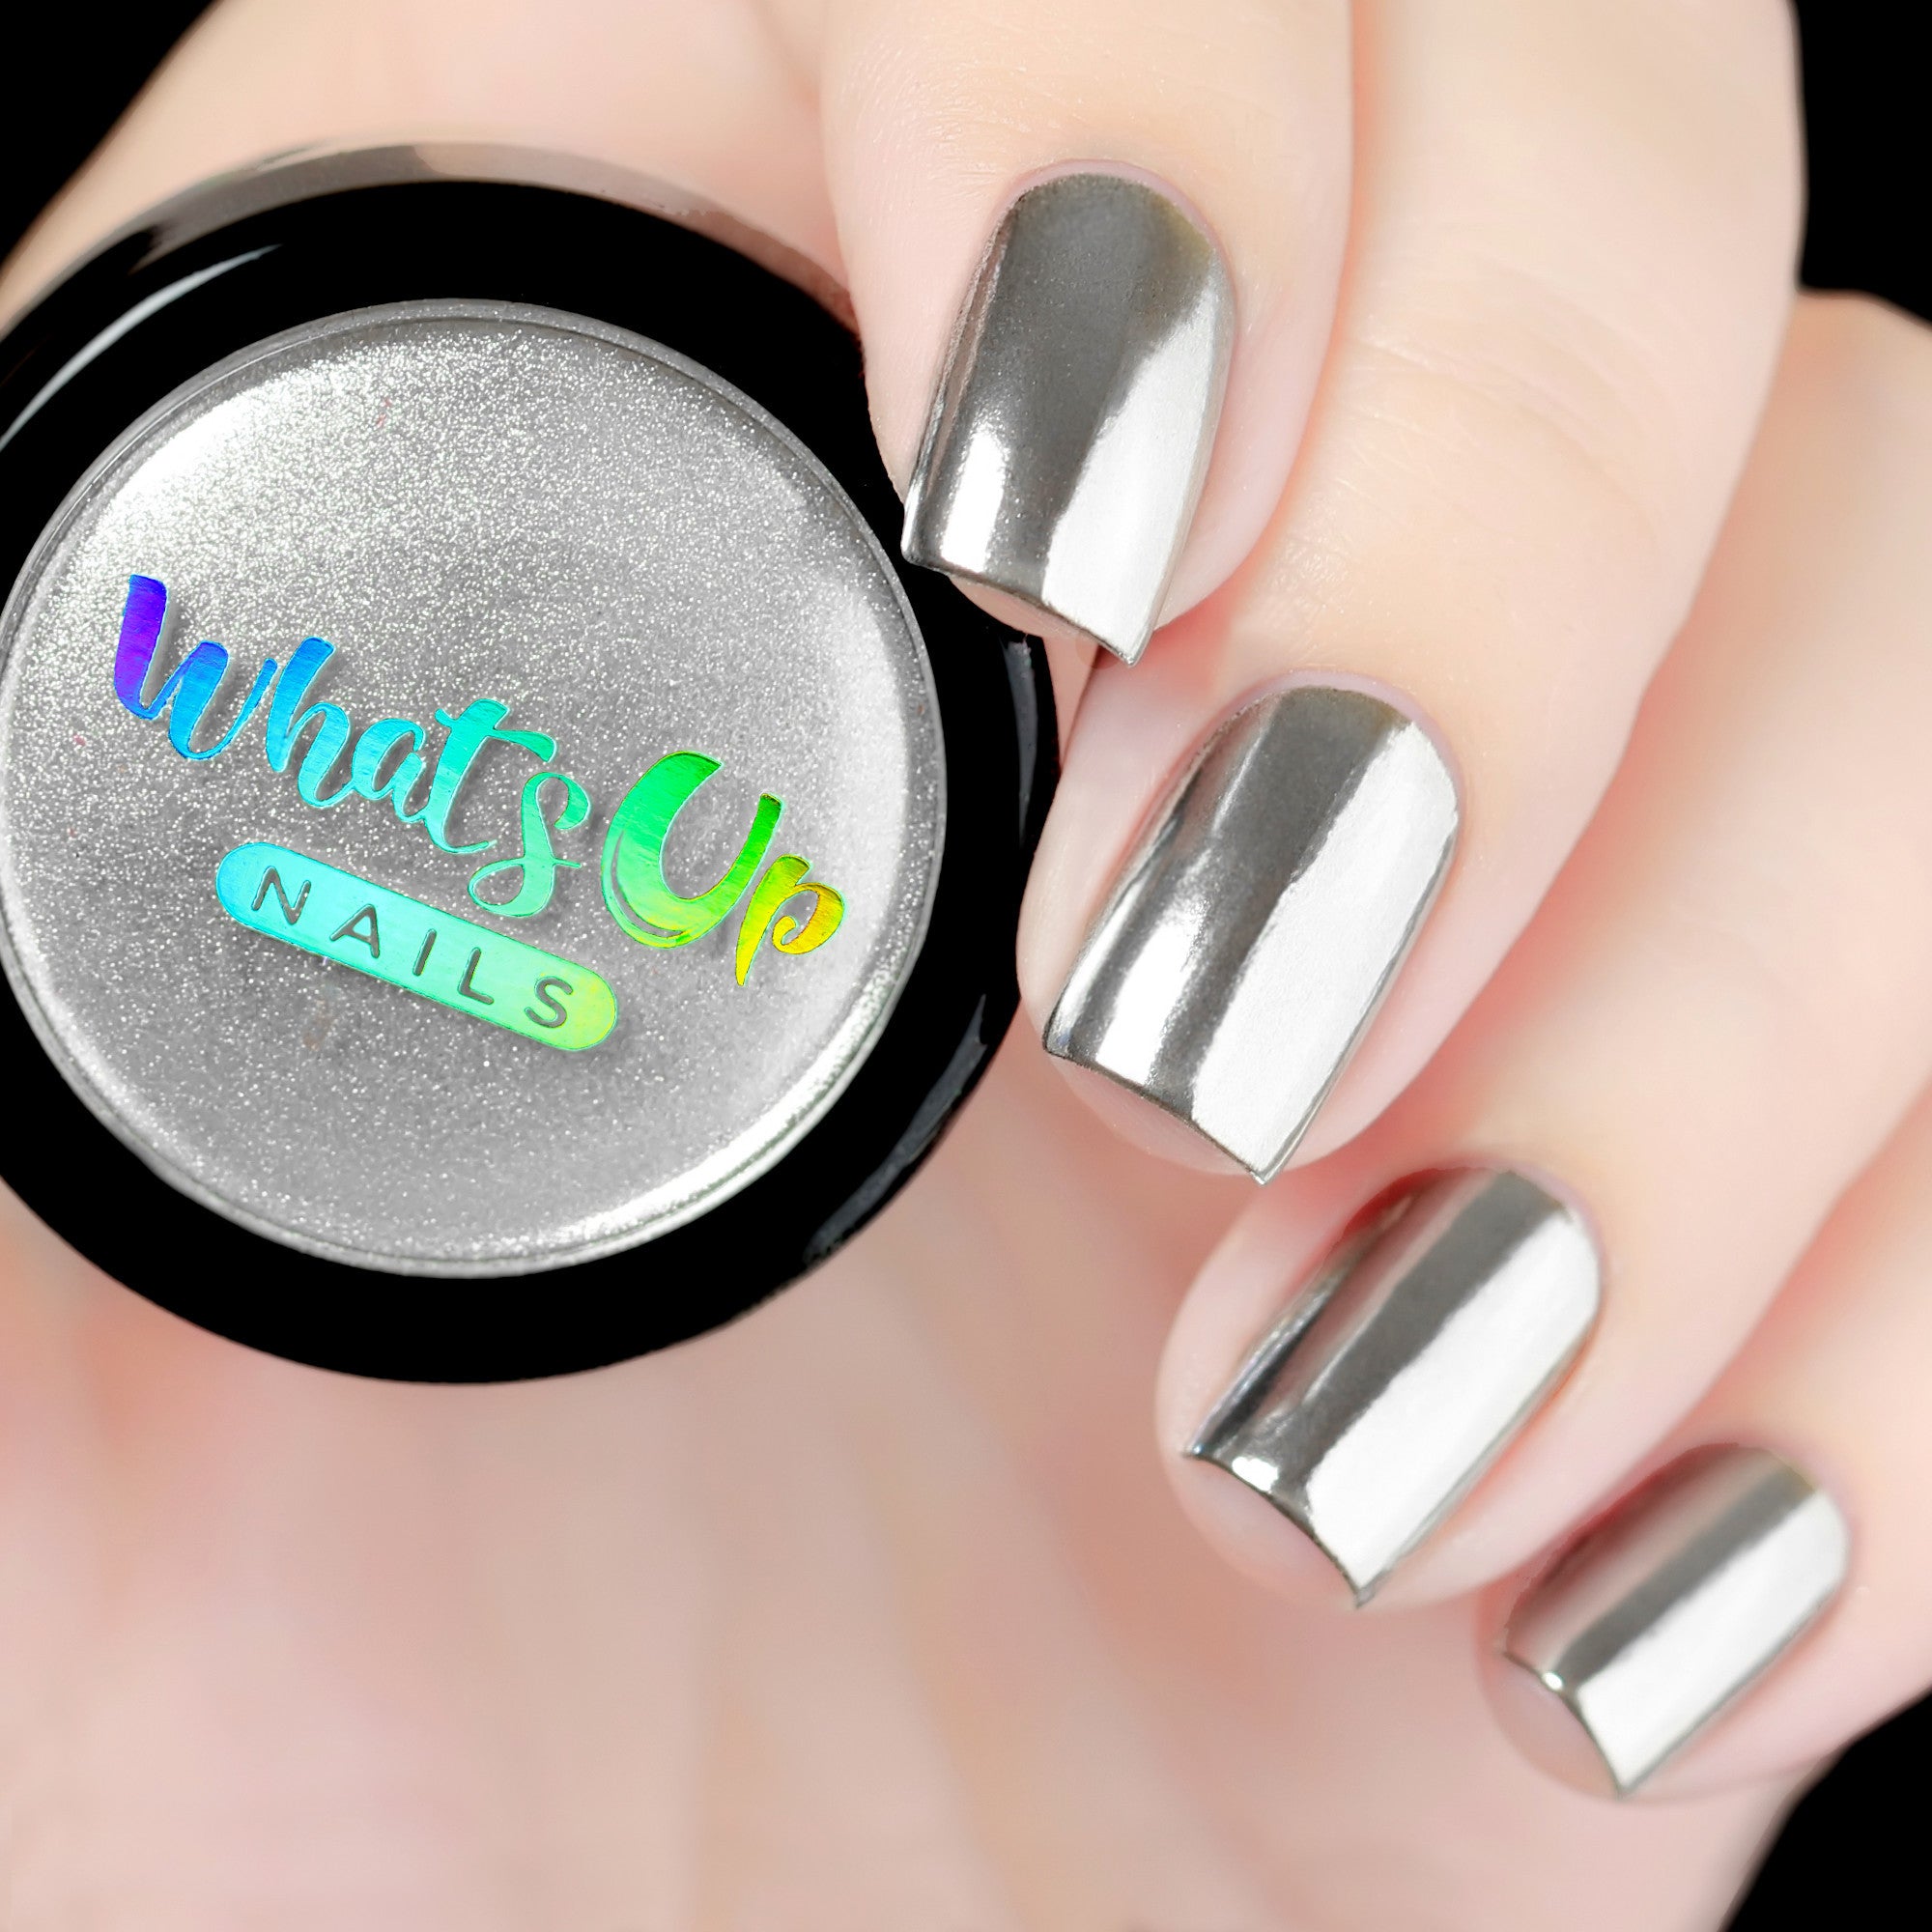 for Nails - Whats Up Nails